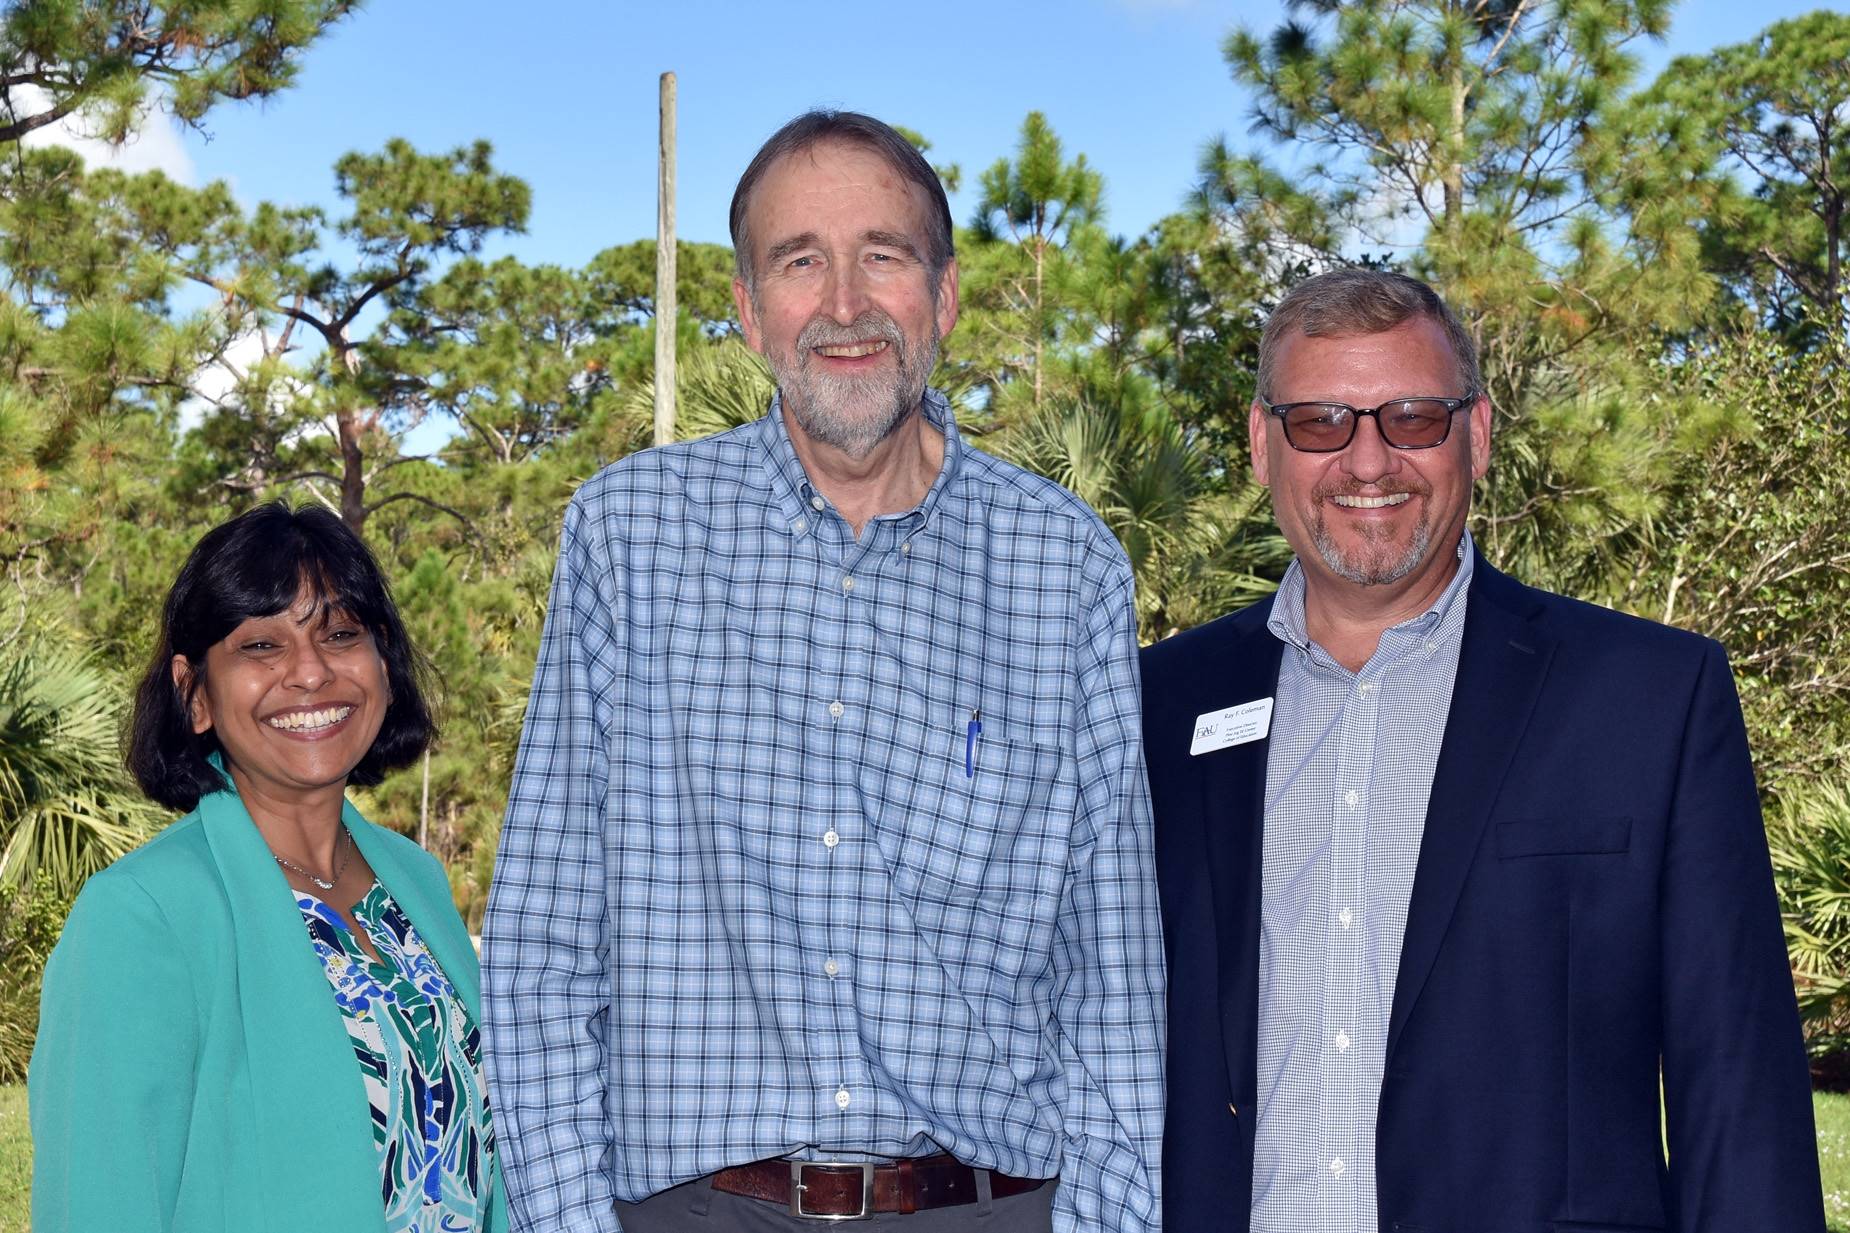 Dilys Schoorman, CCEI Chair, Bill Bigelow, and Ray Coleman, Pine Jog Executive Director